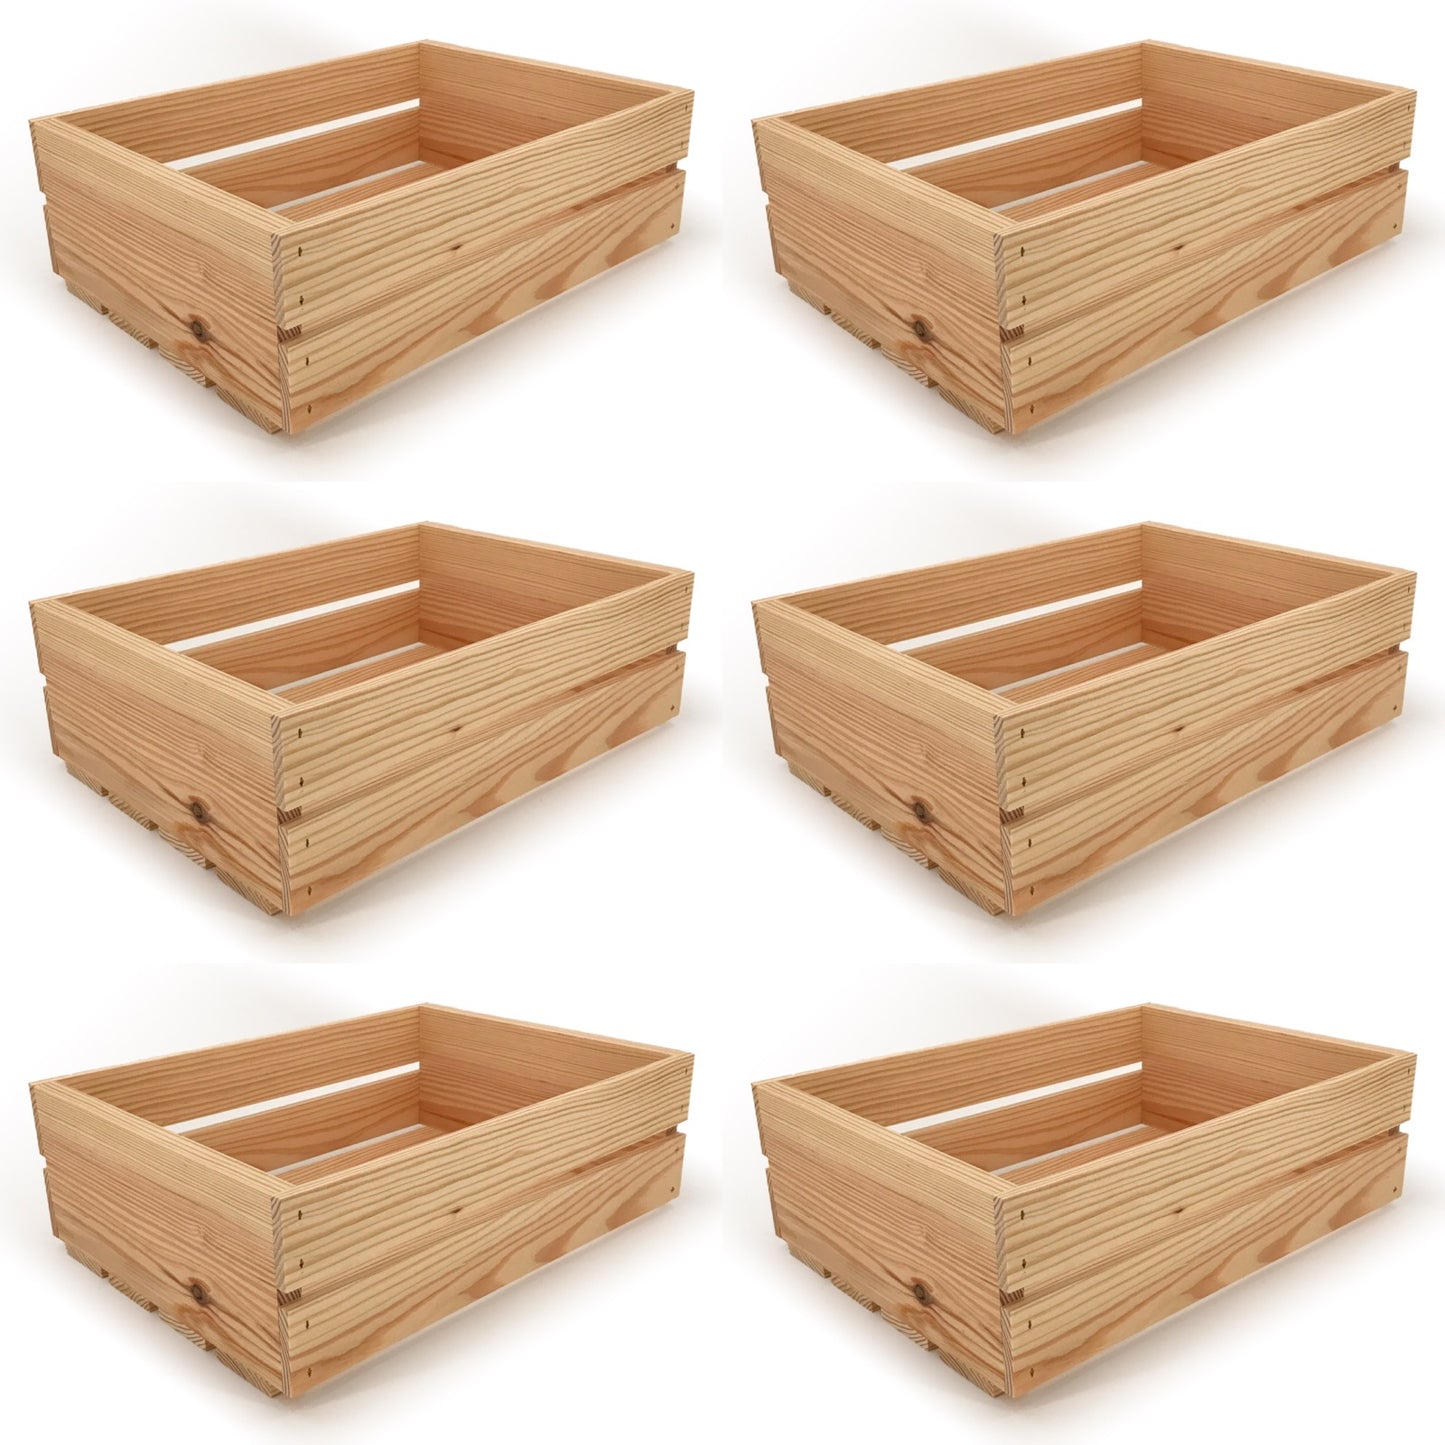 6 Small wooden crates 16x12x5.25